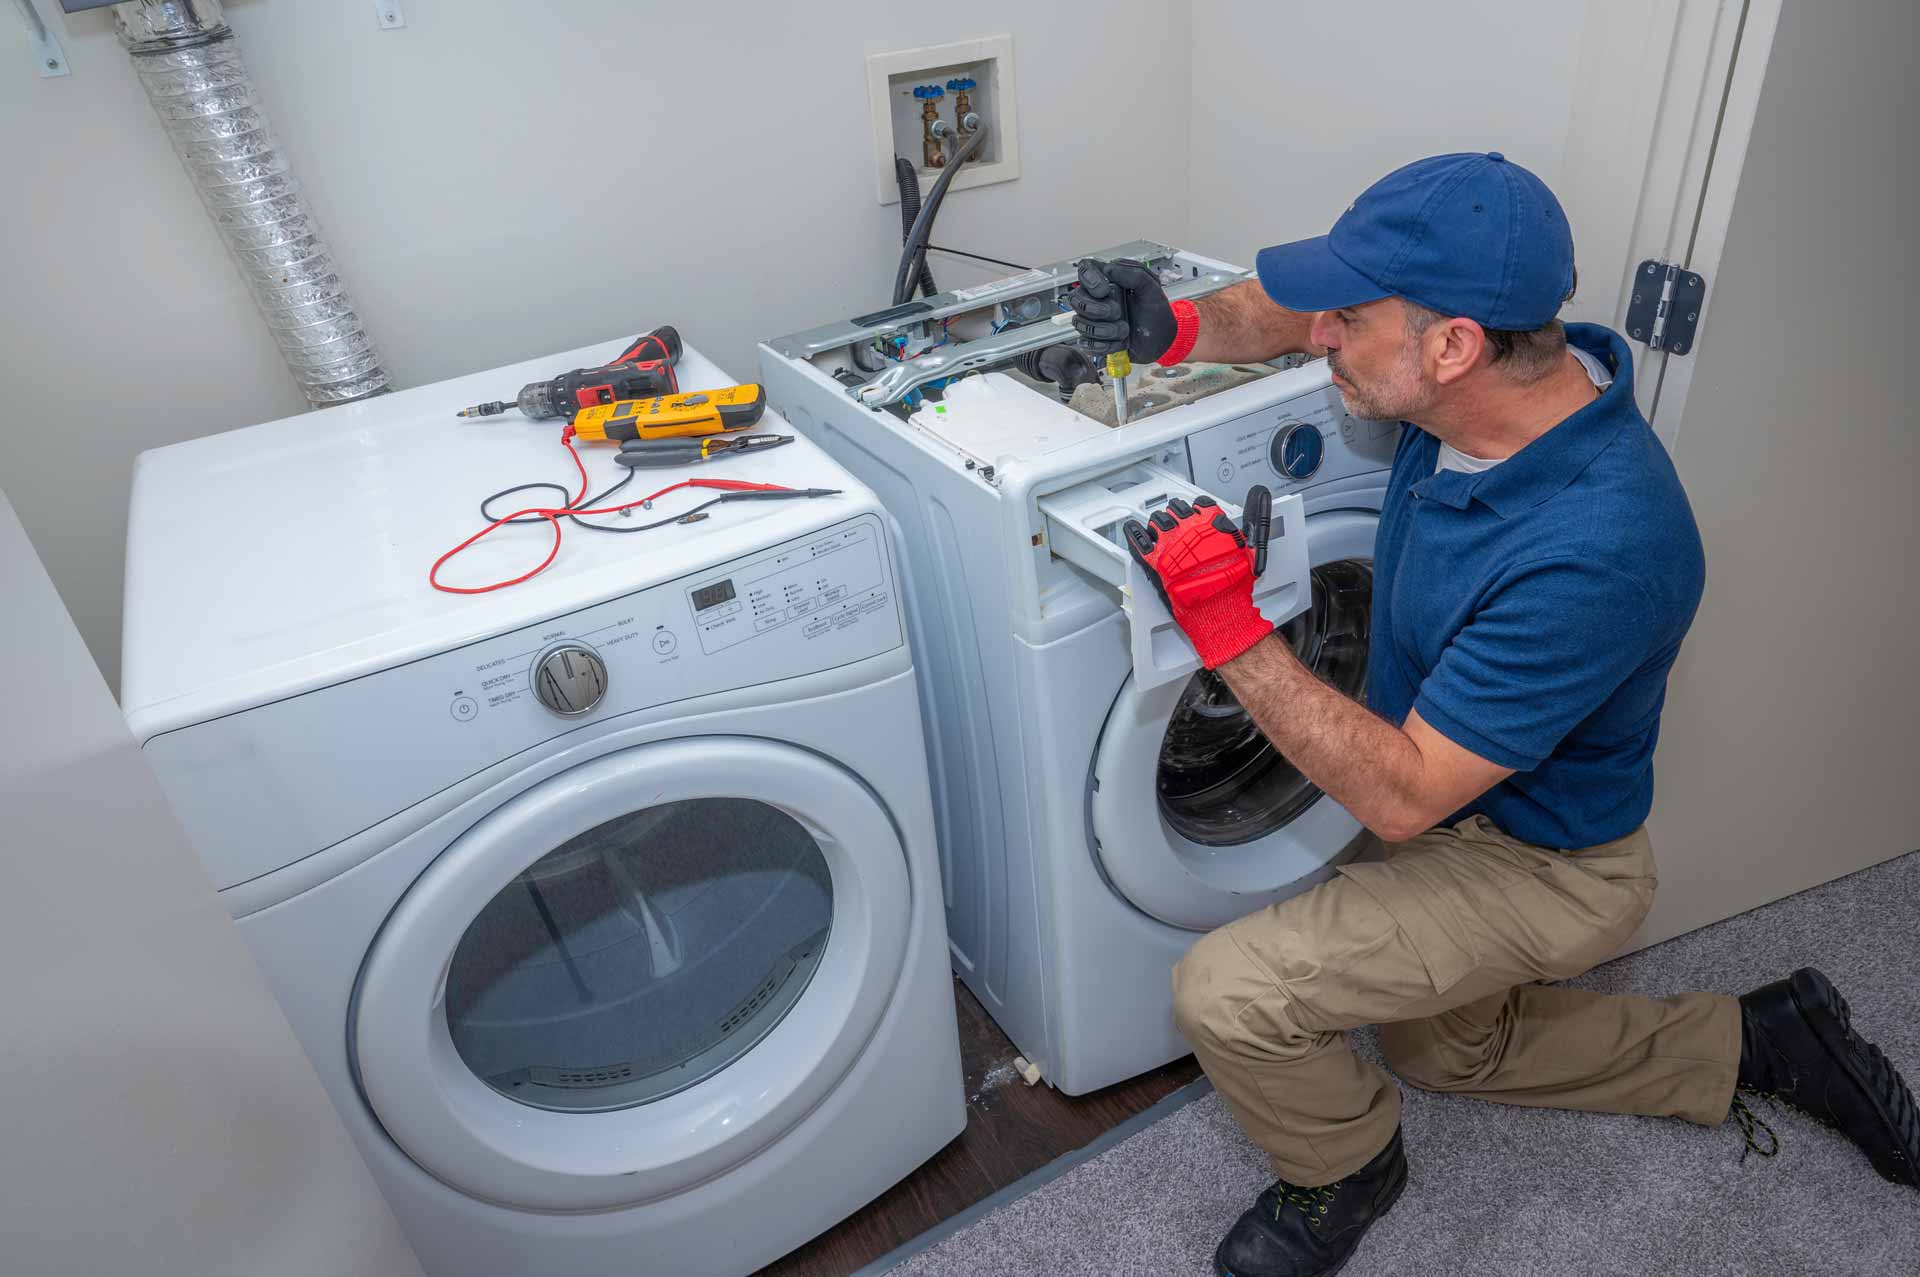 Technician repairing the detergent drawer on a washing machine